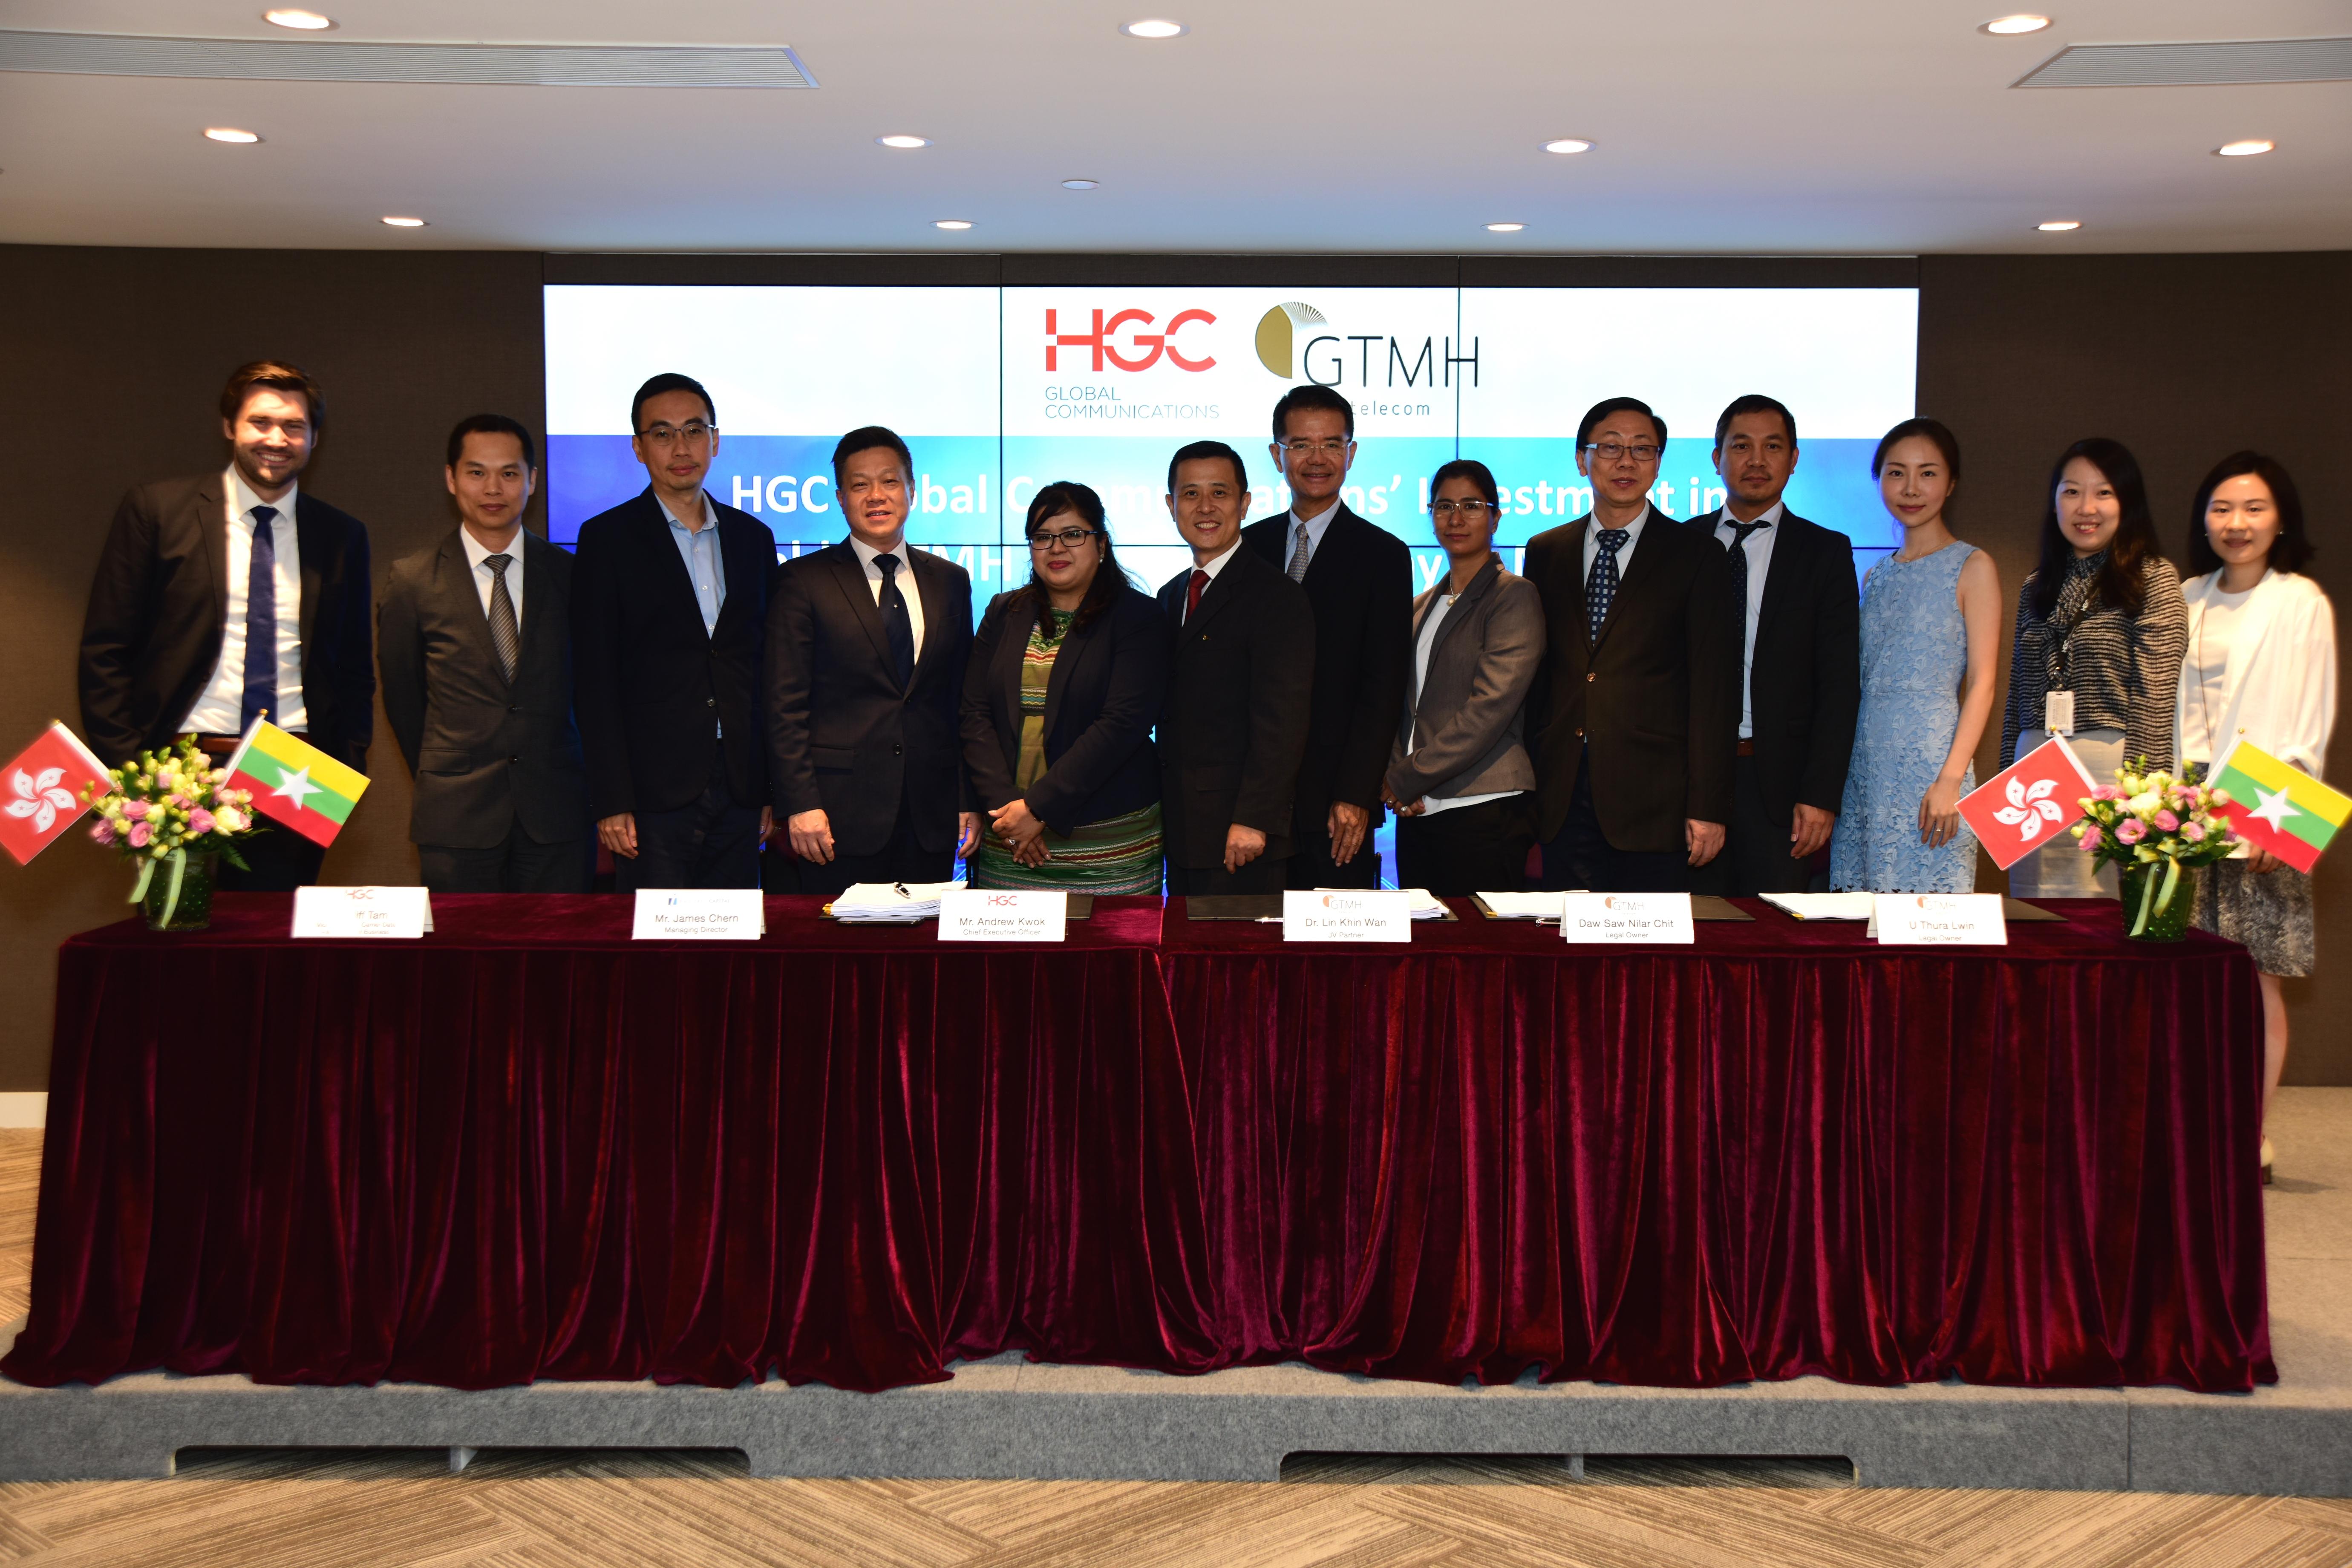 Hgc Acquires A Majority Stake In Gtmh A Leading Network Service Provider In Myanmar